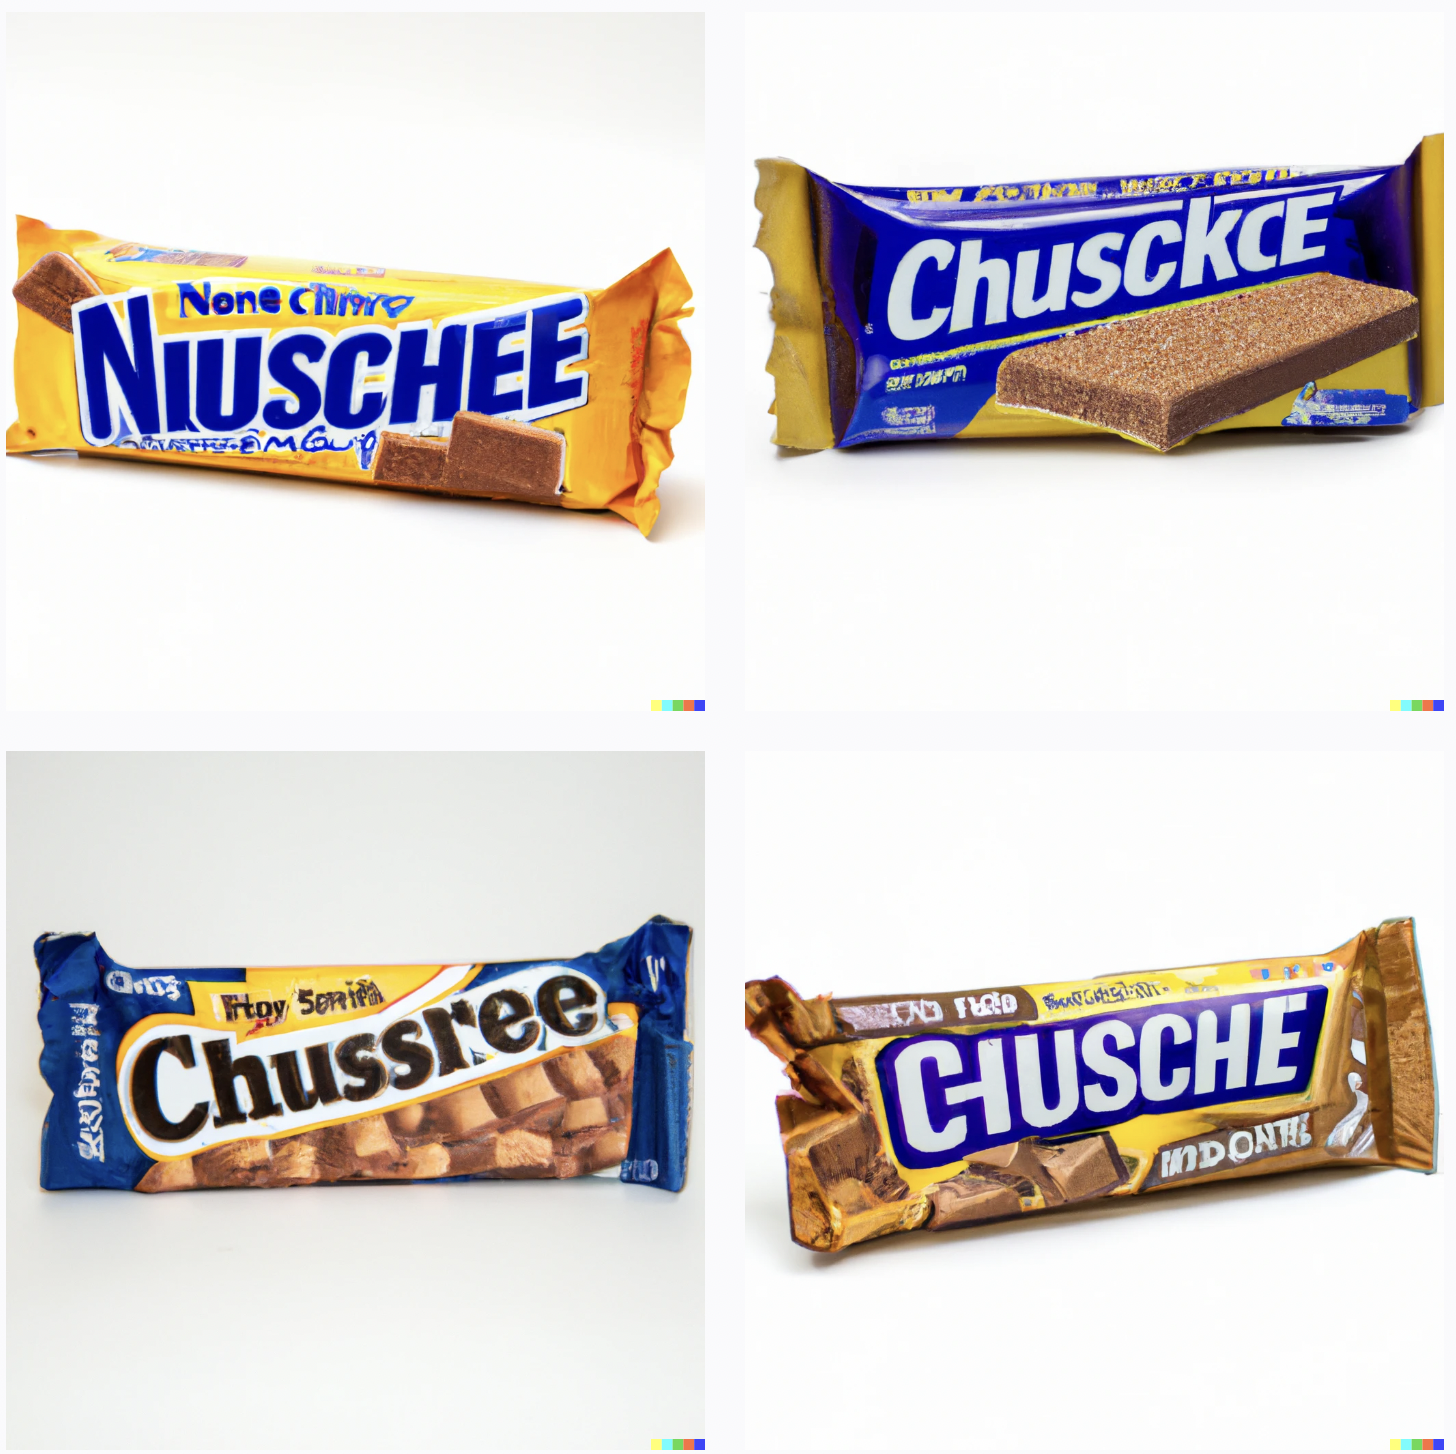 Wrapped candy bars showing airy or crumbled textures. Text reads "Nuischee", "Chusckce", "Chussree", and "Clusche"